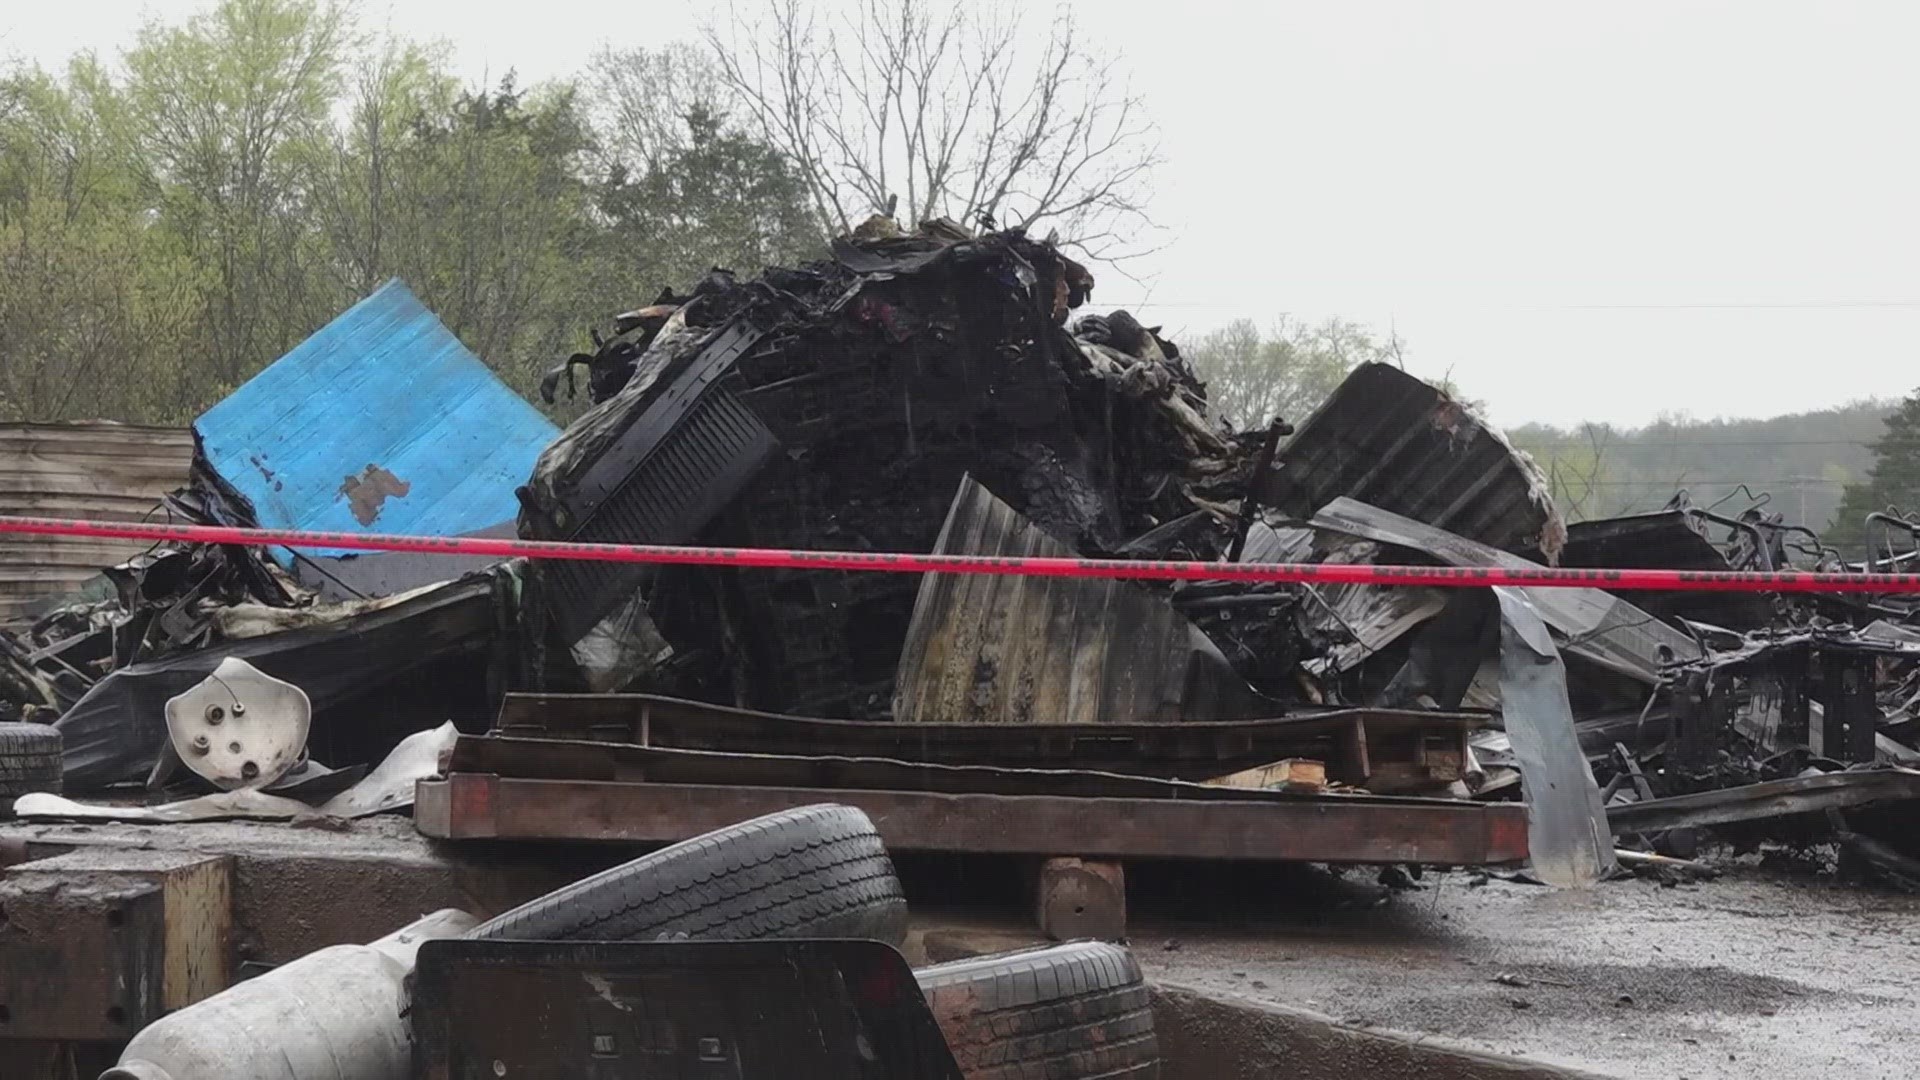 The Dandridge Fire Department Chief said between the cost of the building, the equipment inside and damaged cars, the estimated loss is about $1 million.